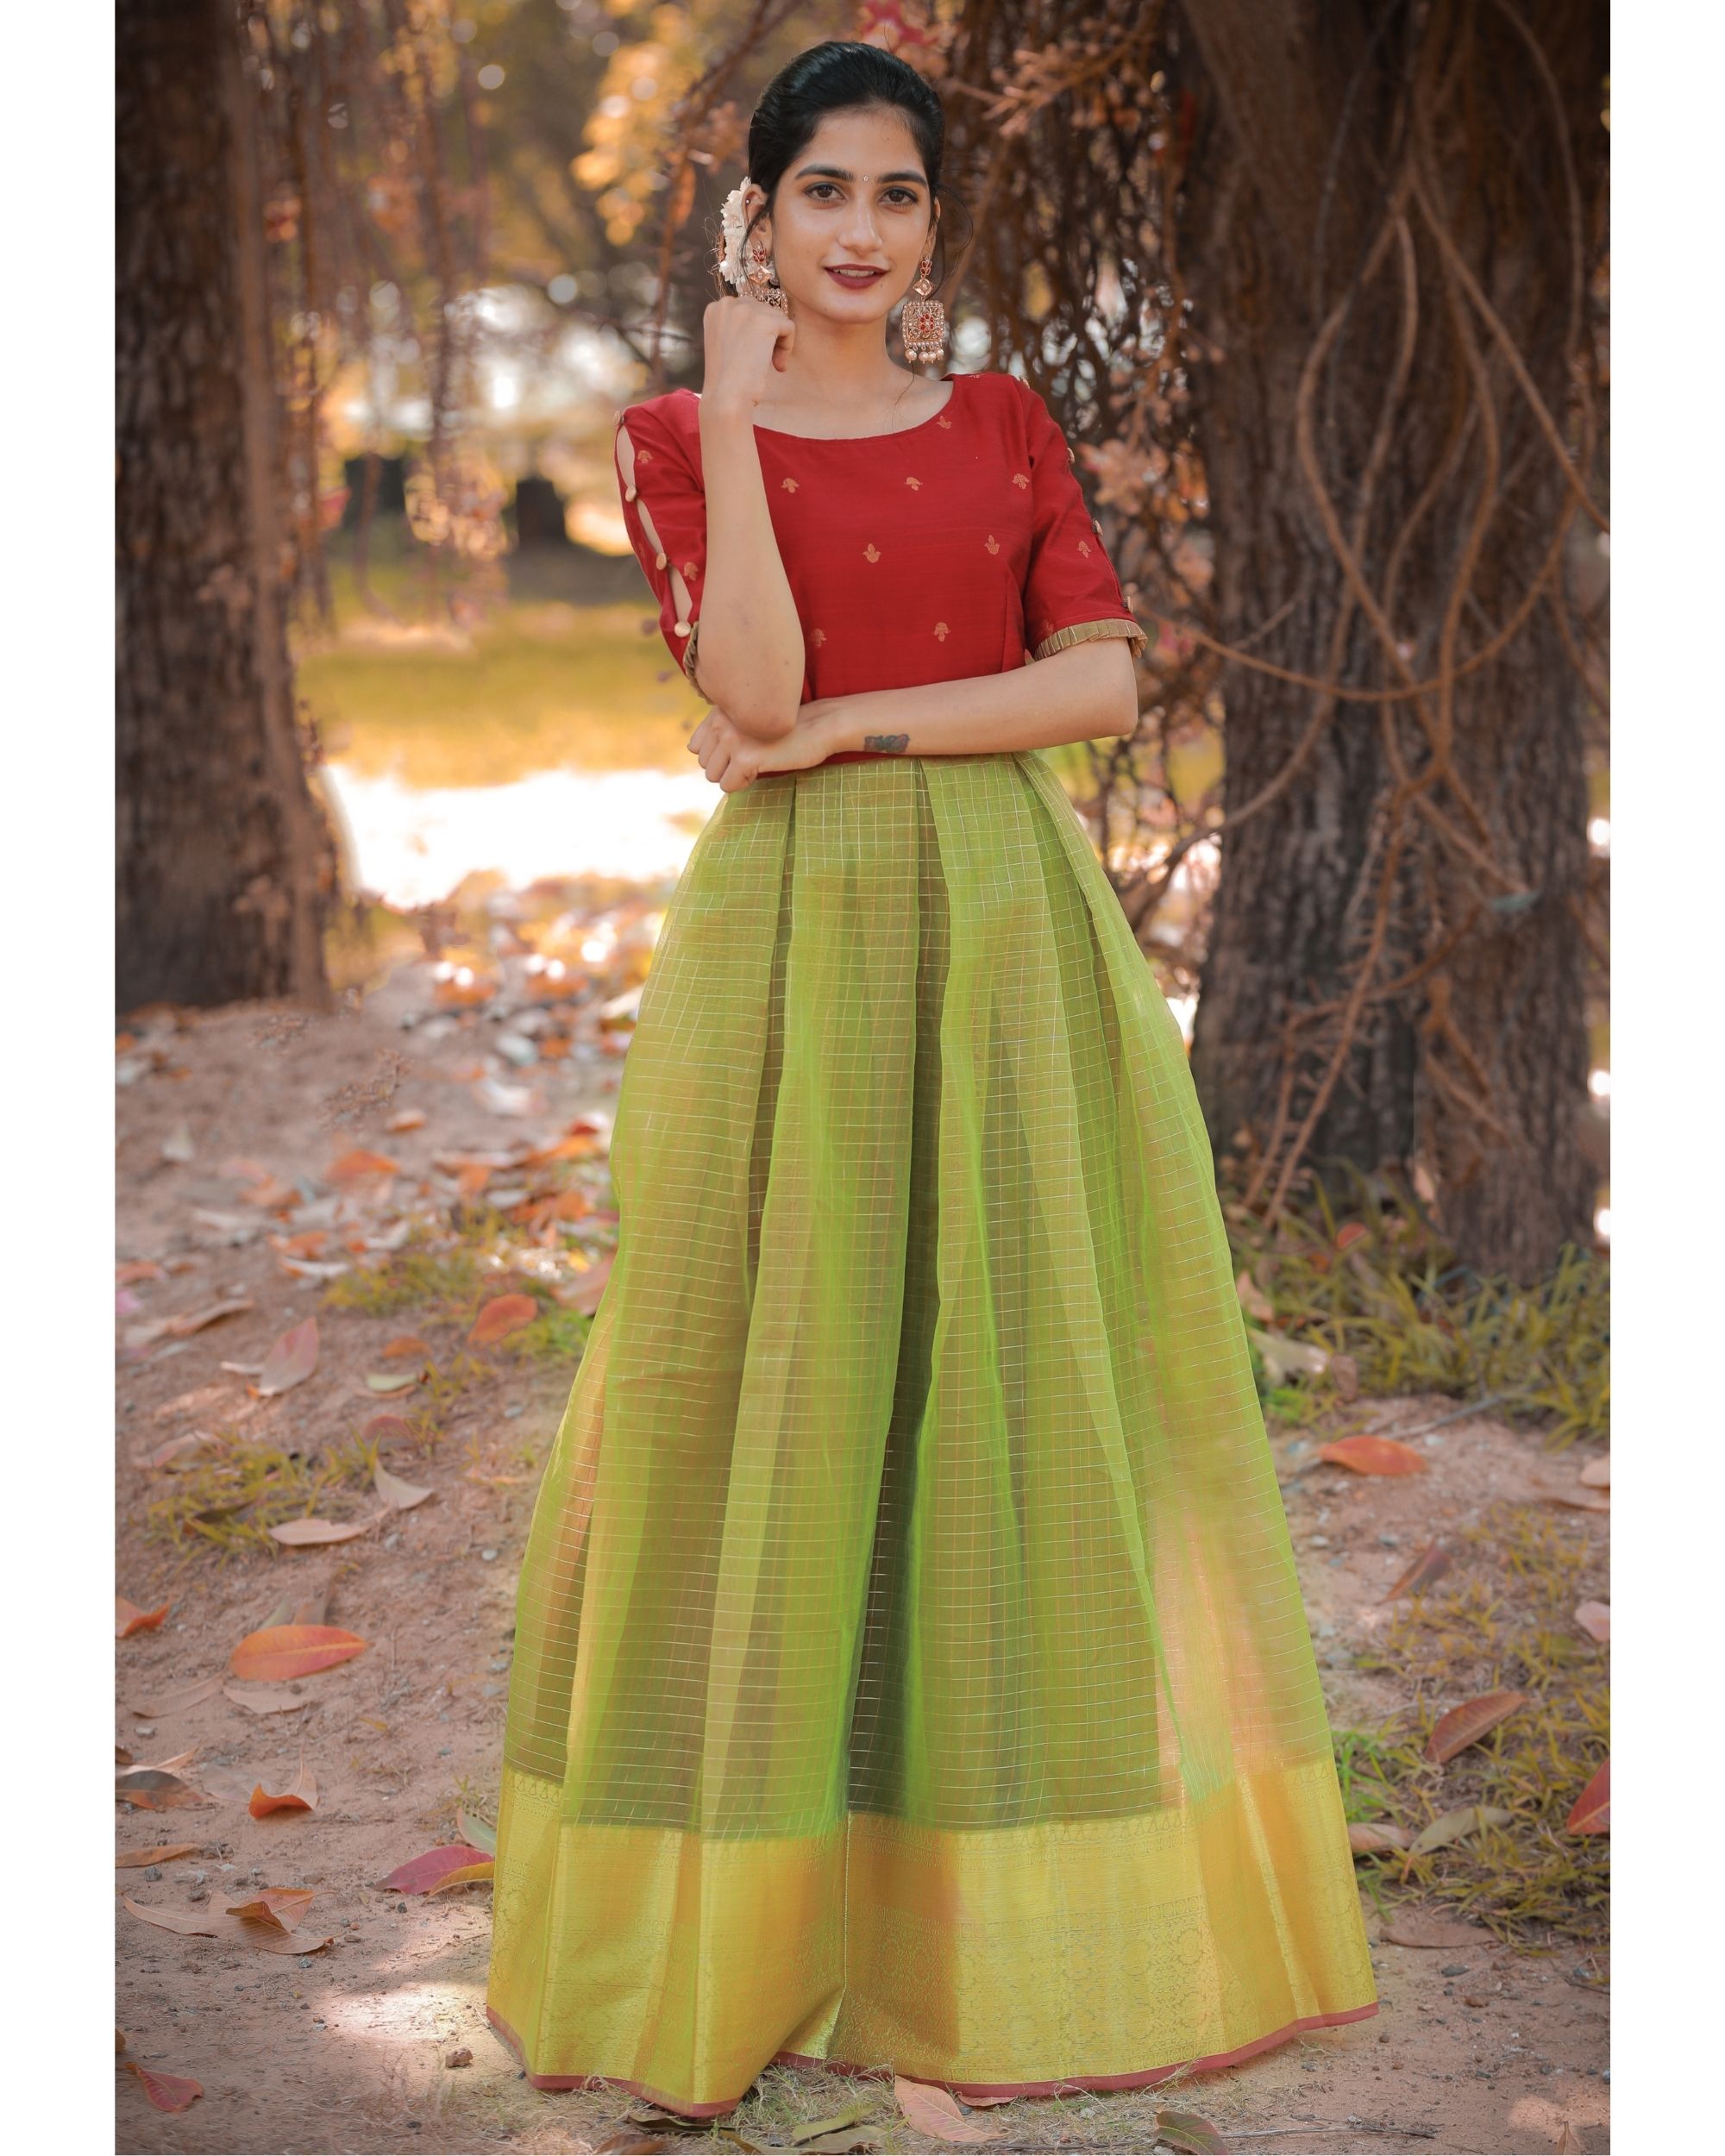 Red and green checkered box pleated maxi dress